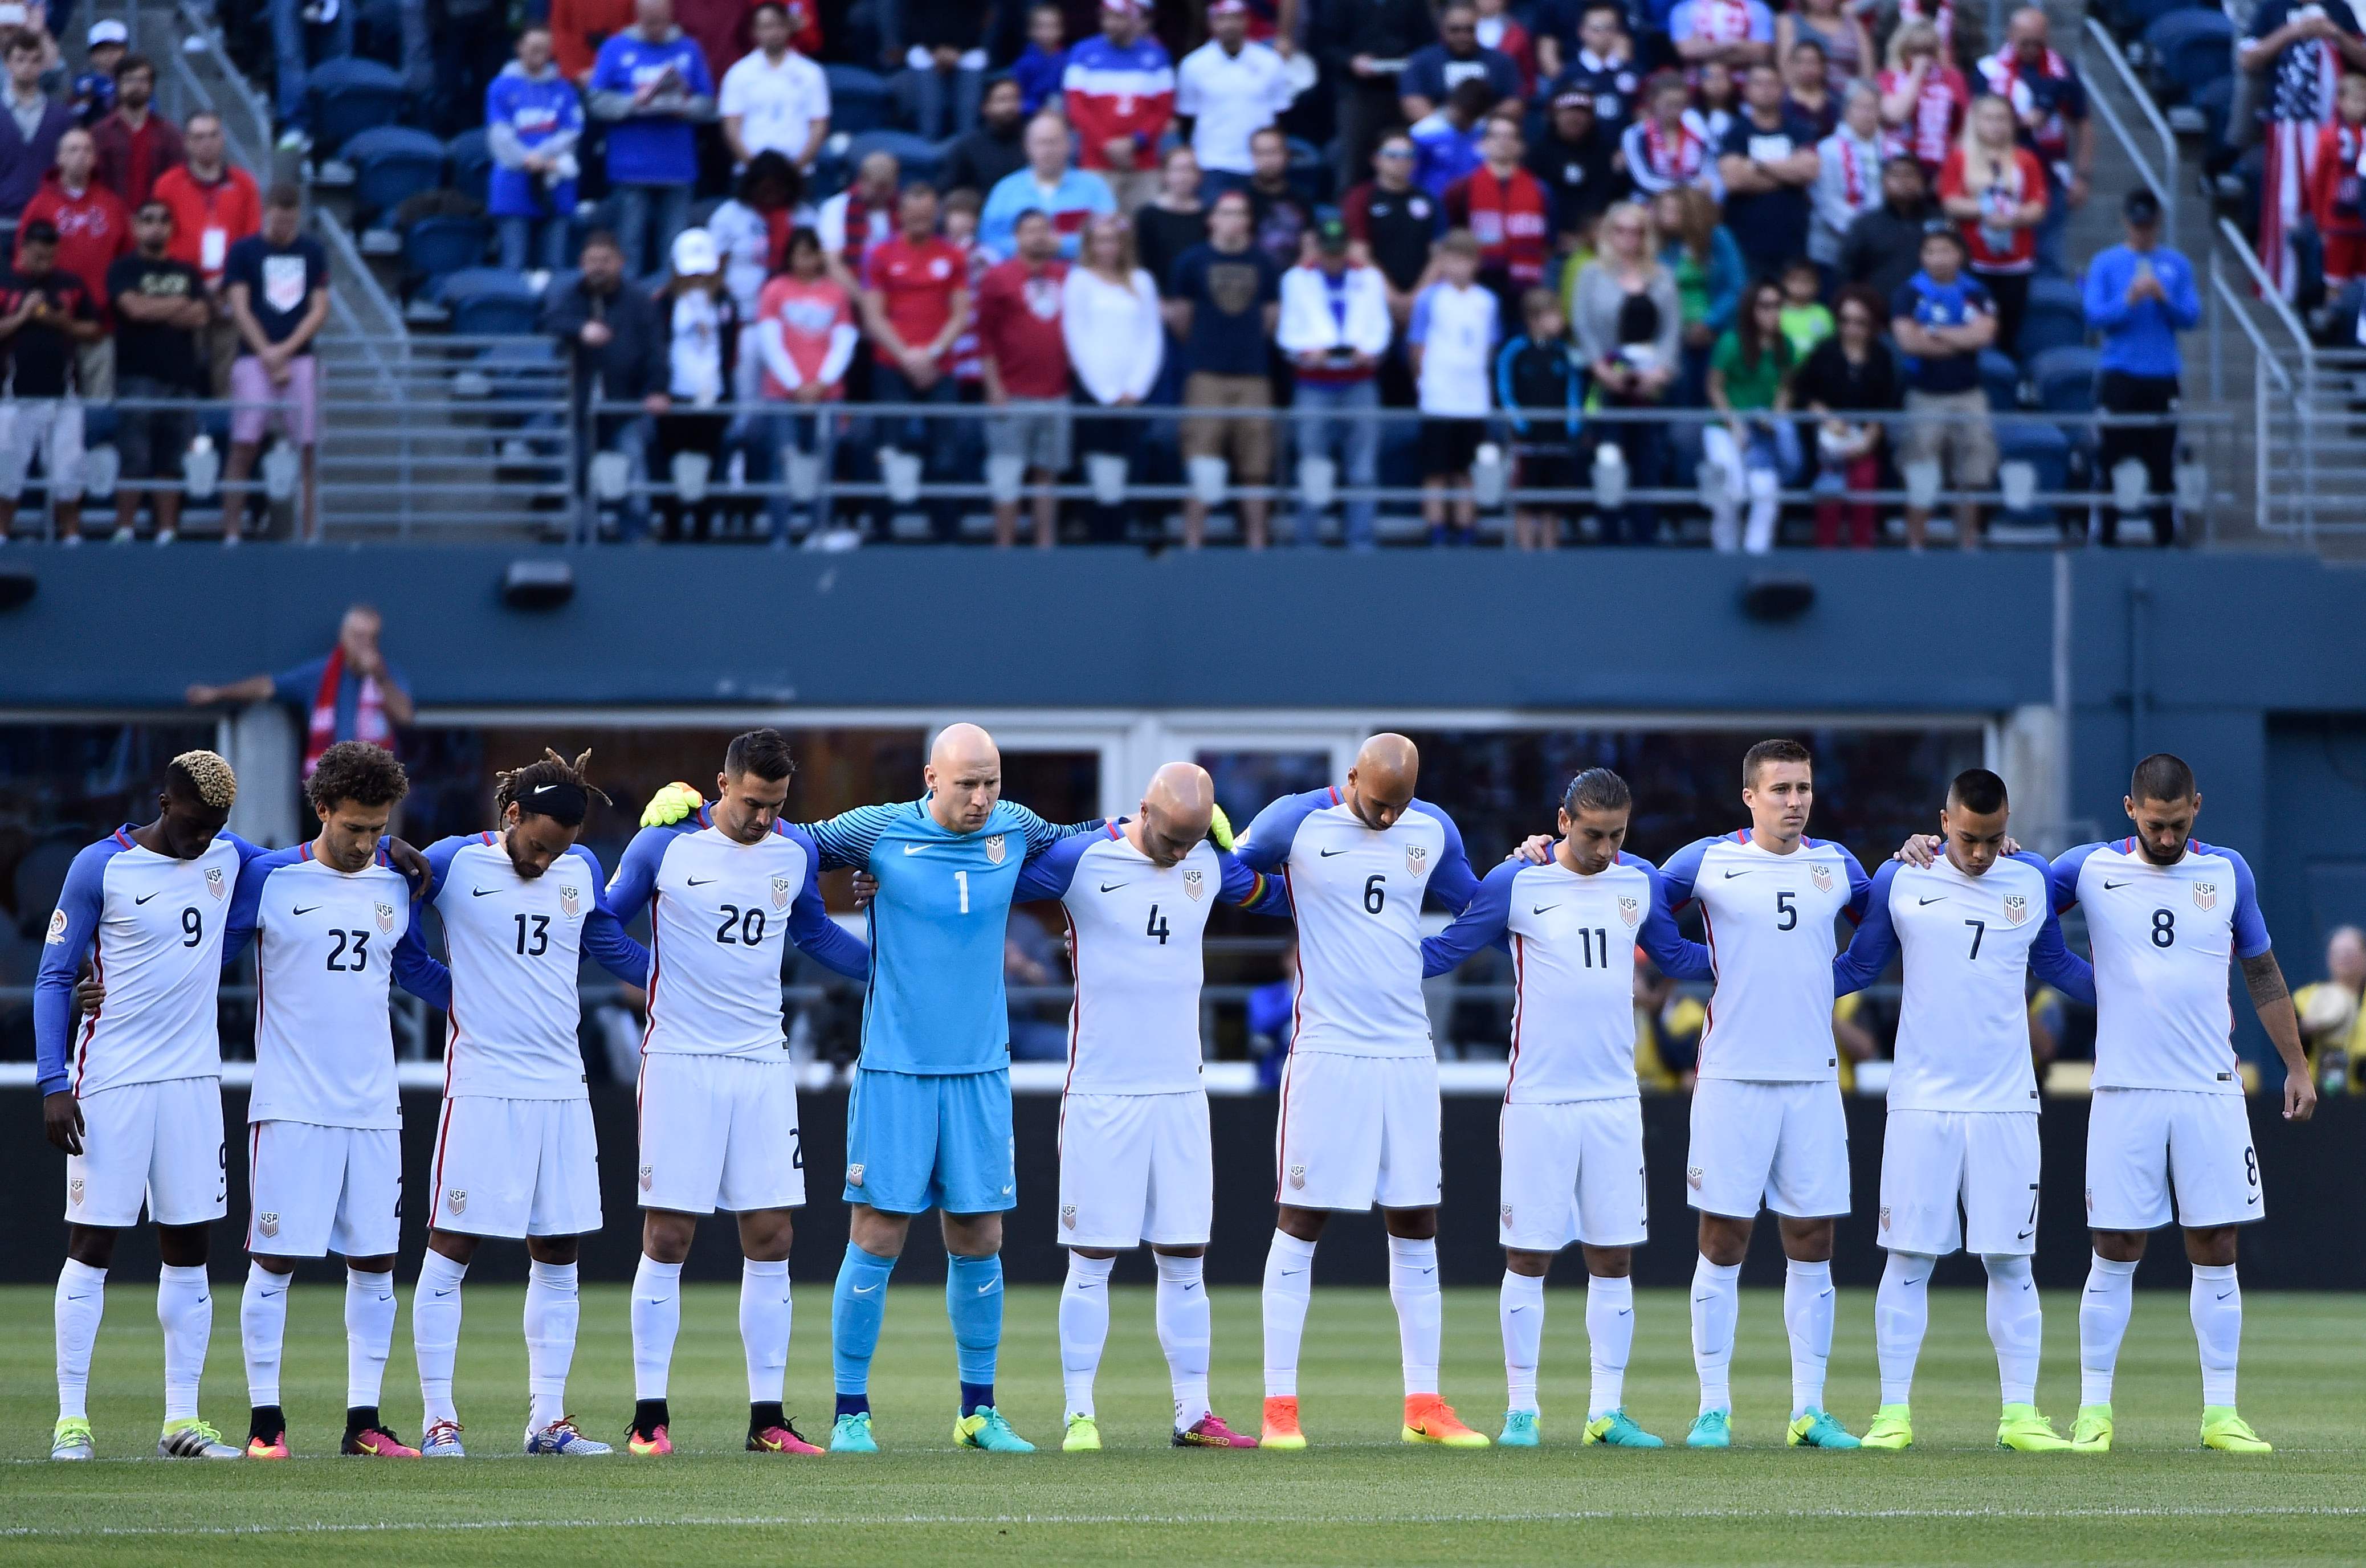 Men differ on U.S. Soccer banning players from anthem protest